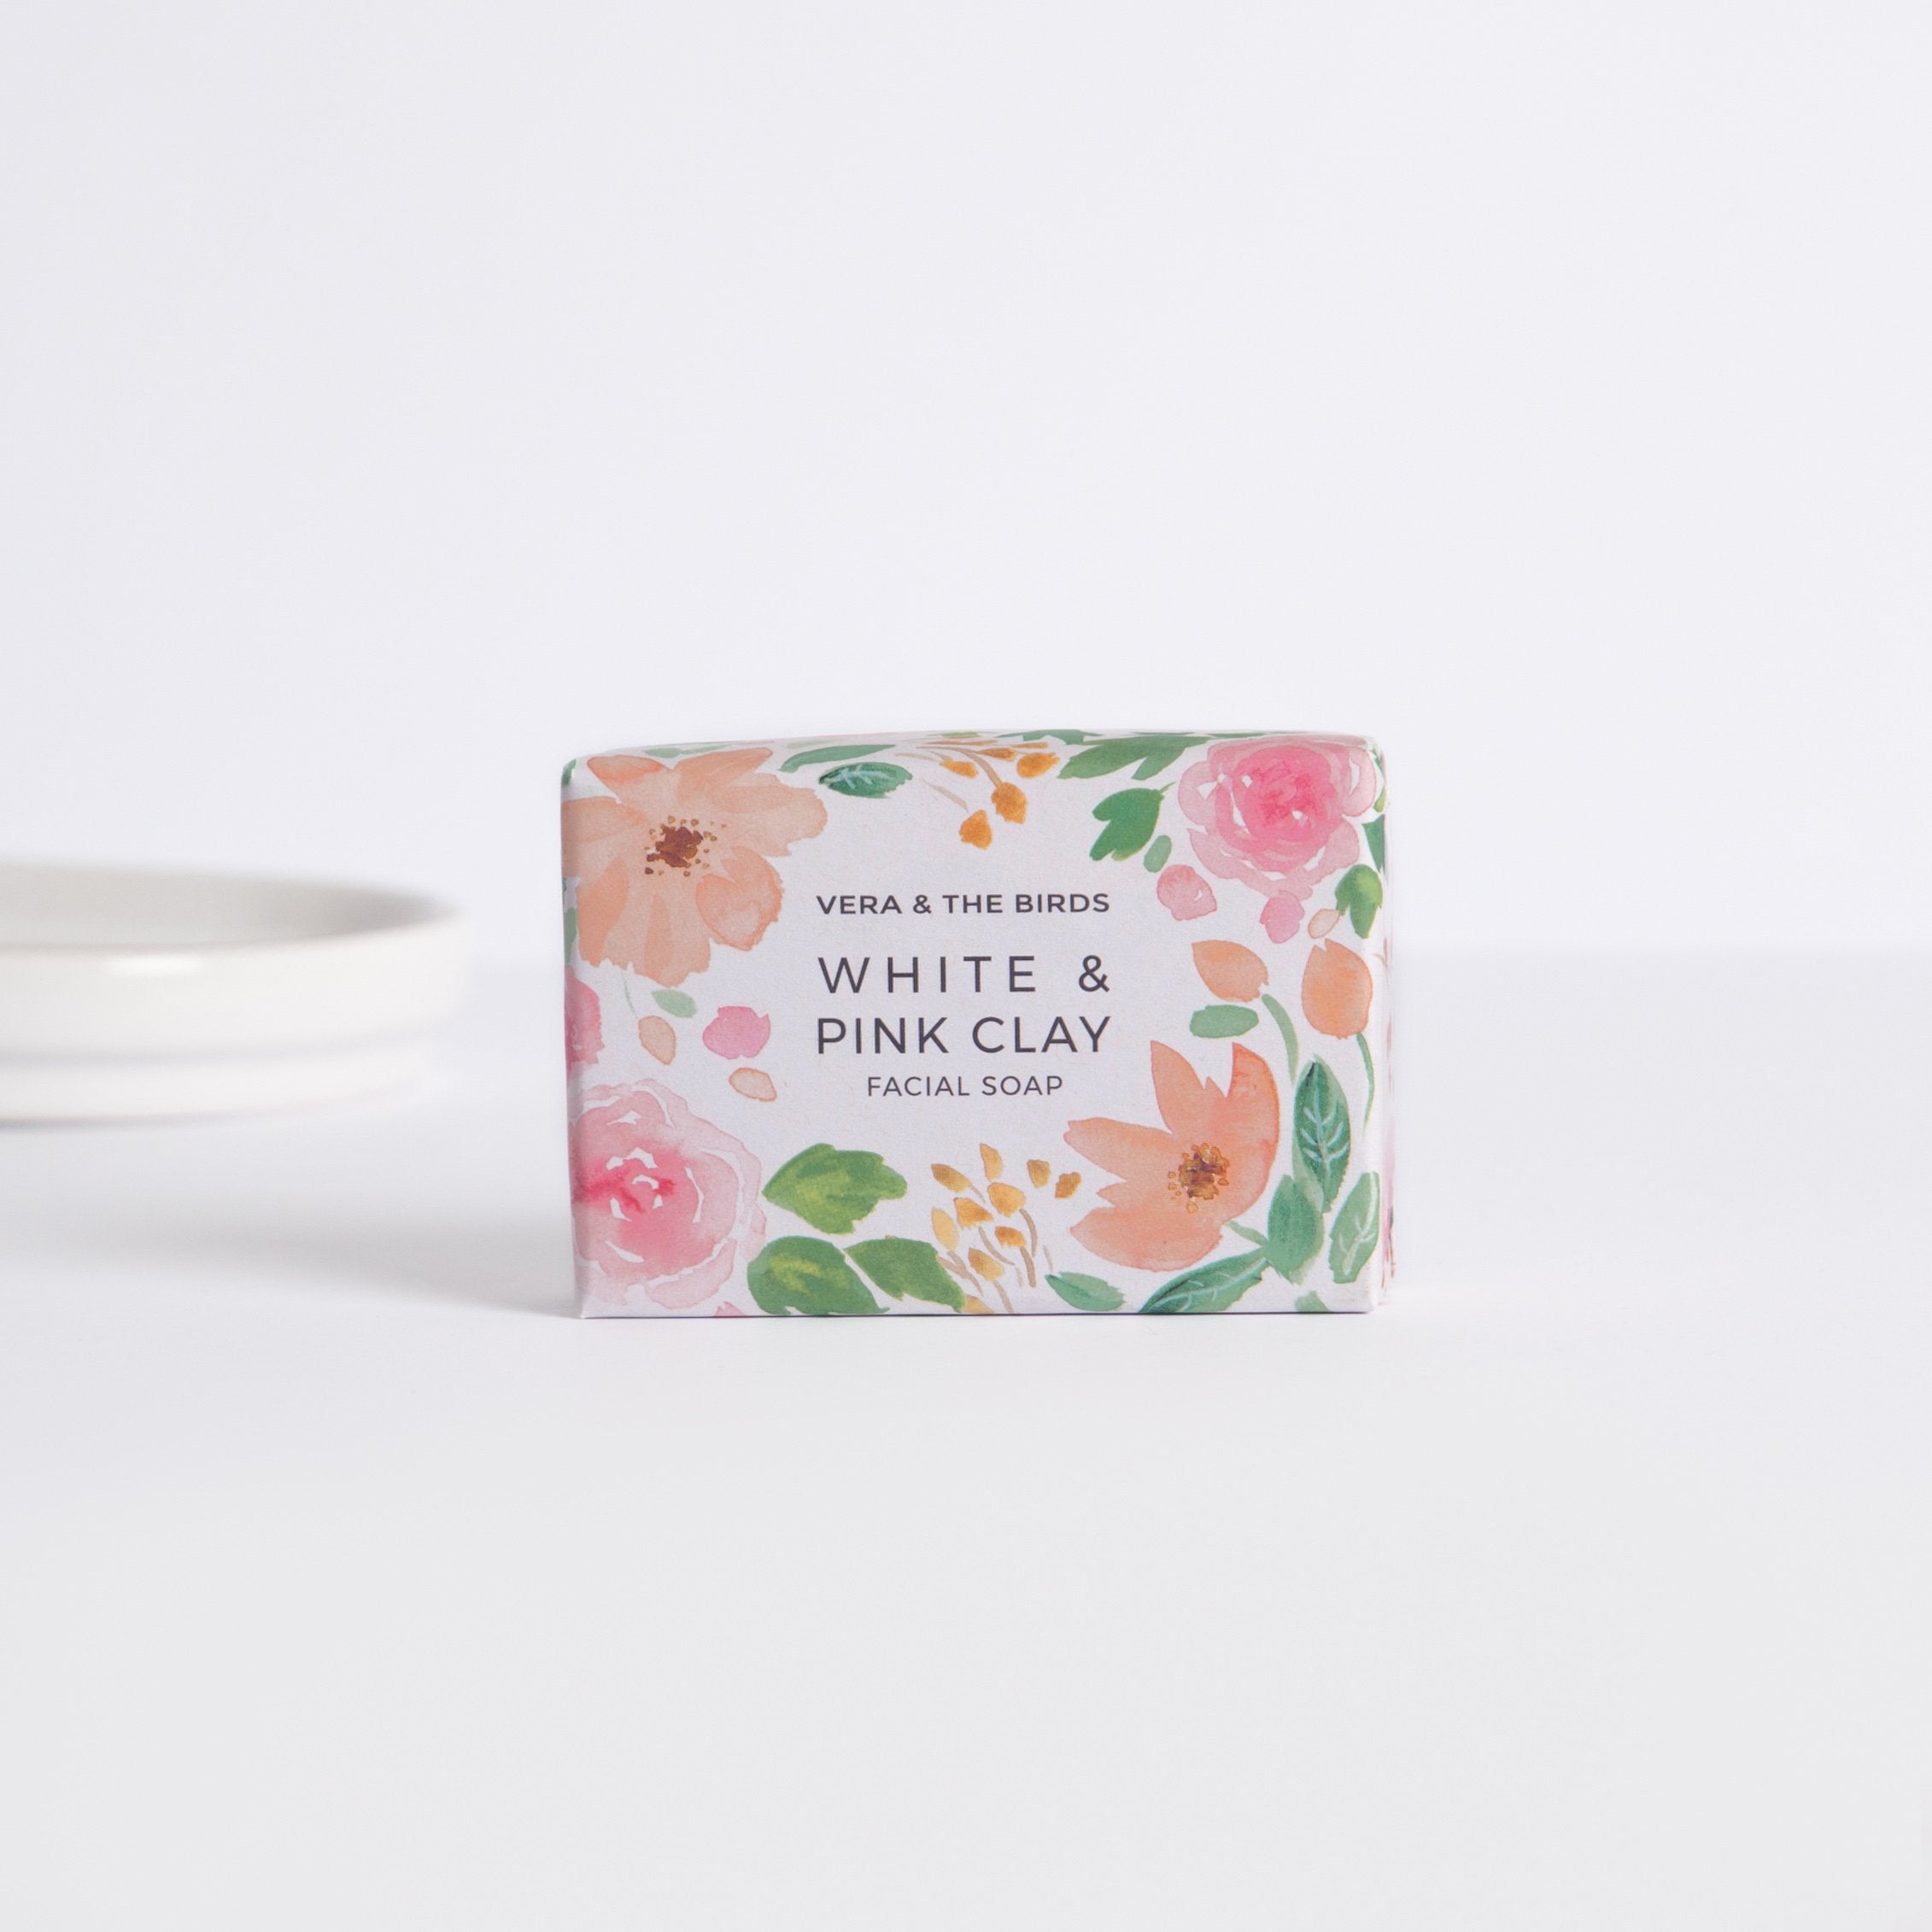 WHITE & PINK CLAY FACIAL SOAP